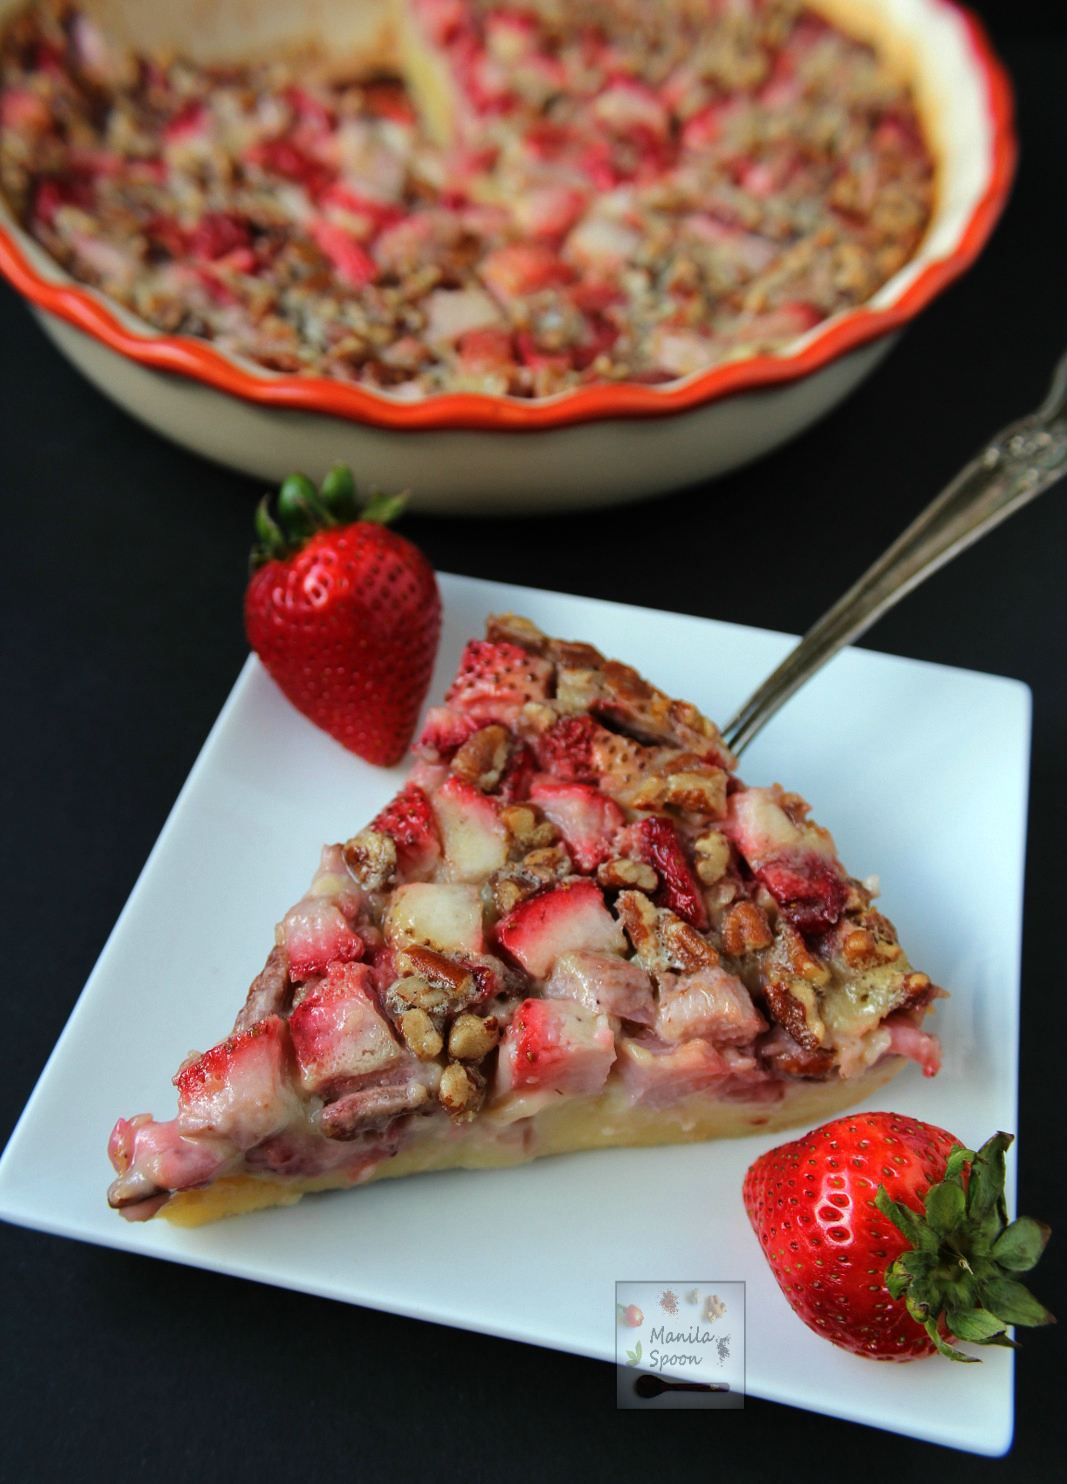 This delicious tart is unbelievably easy to make! Studded with the juiciest strawberries and crunchy pecans and then baked in a sweet vanilla custard batter it's the perfect summer dessert - Strawberry and Pecan Clafoutis | manilaspoon.com